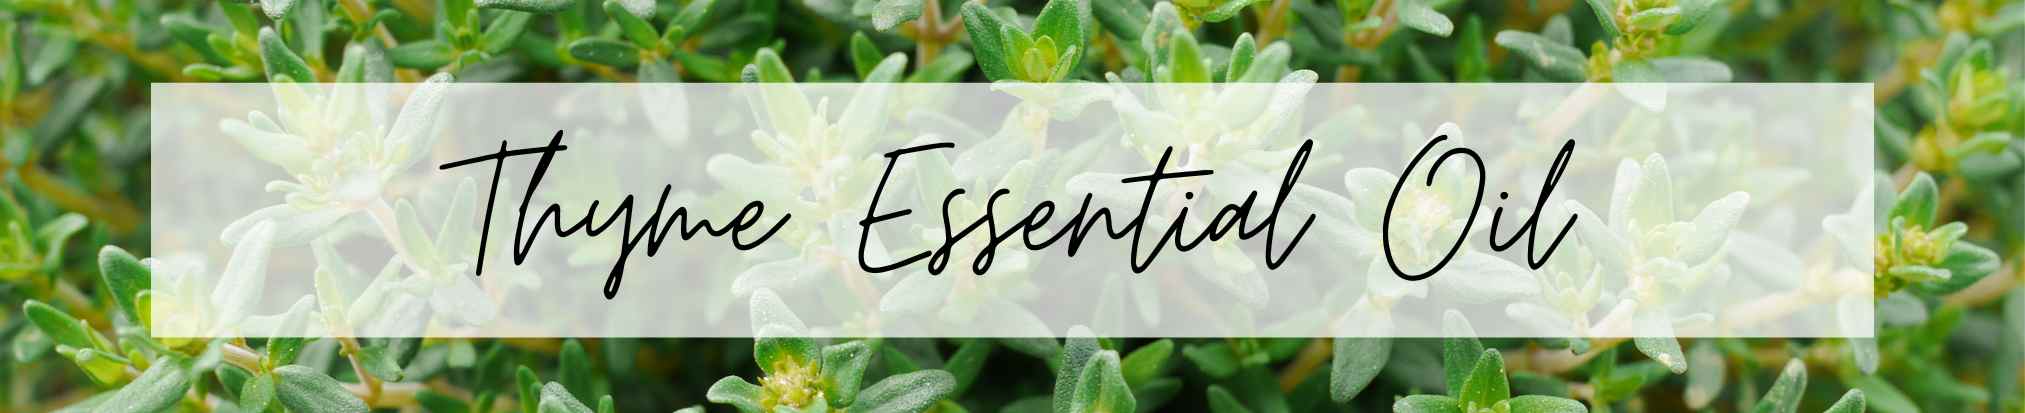 Nila Singapore Aromatherapy Bar | How to Use Essential Oils for Cleaning | Top 9 Disinfecting Essential Oils | Thyme Essential Oil